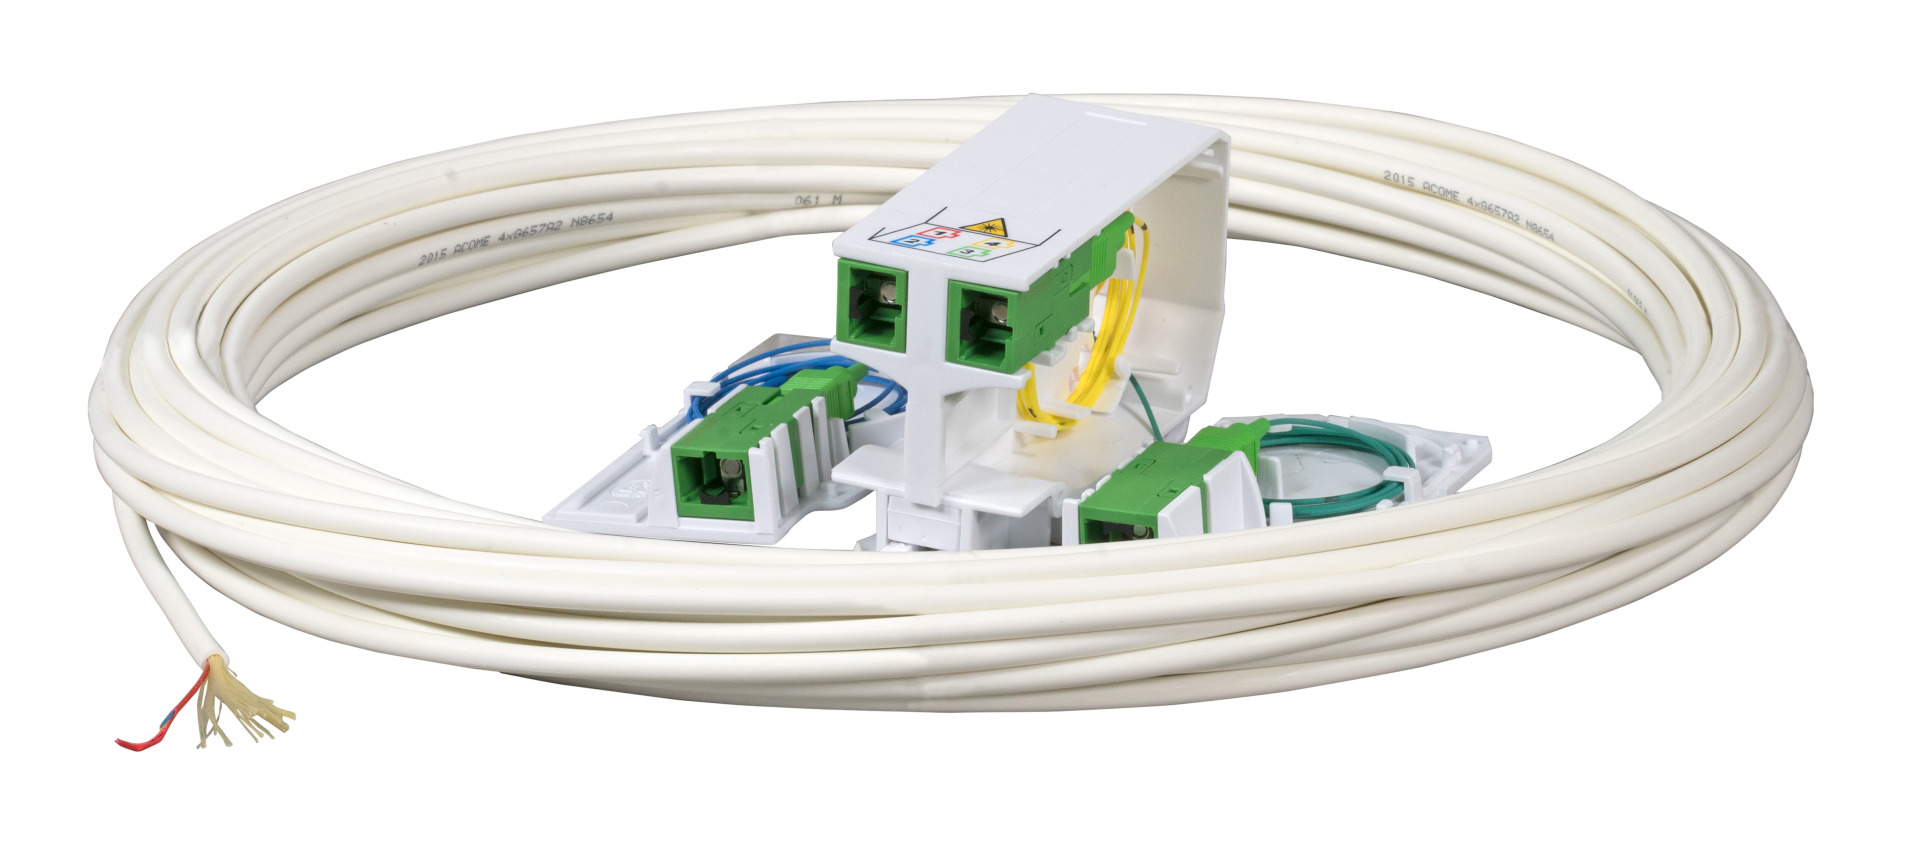 FTTH DIN RAIL Adapter,4x SC/APC adapter, Laserprotection integrated,100m DropCa